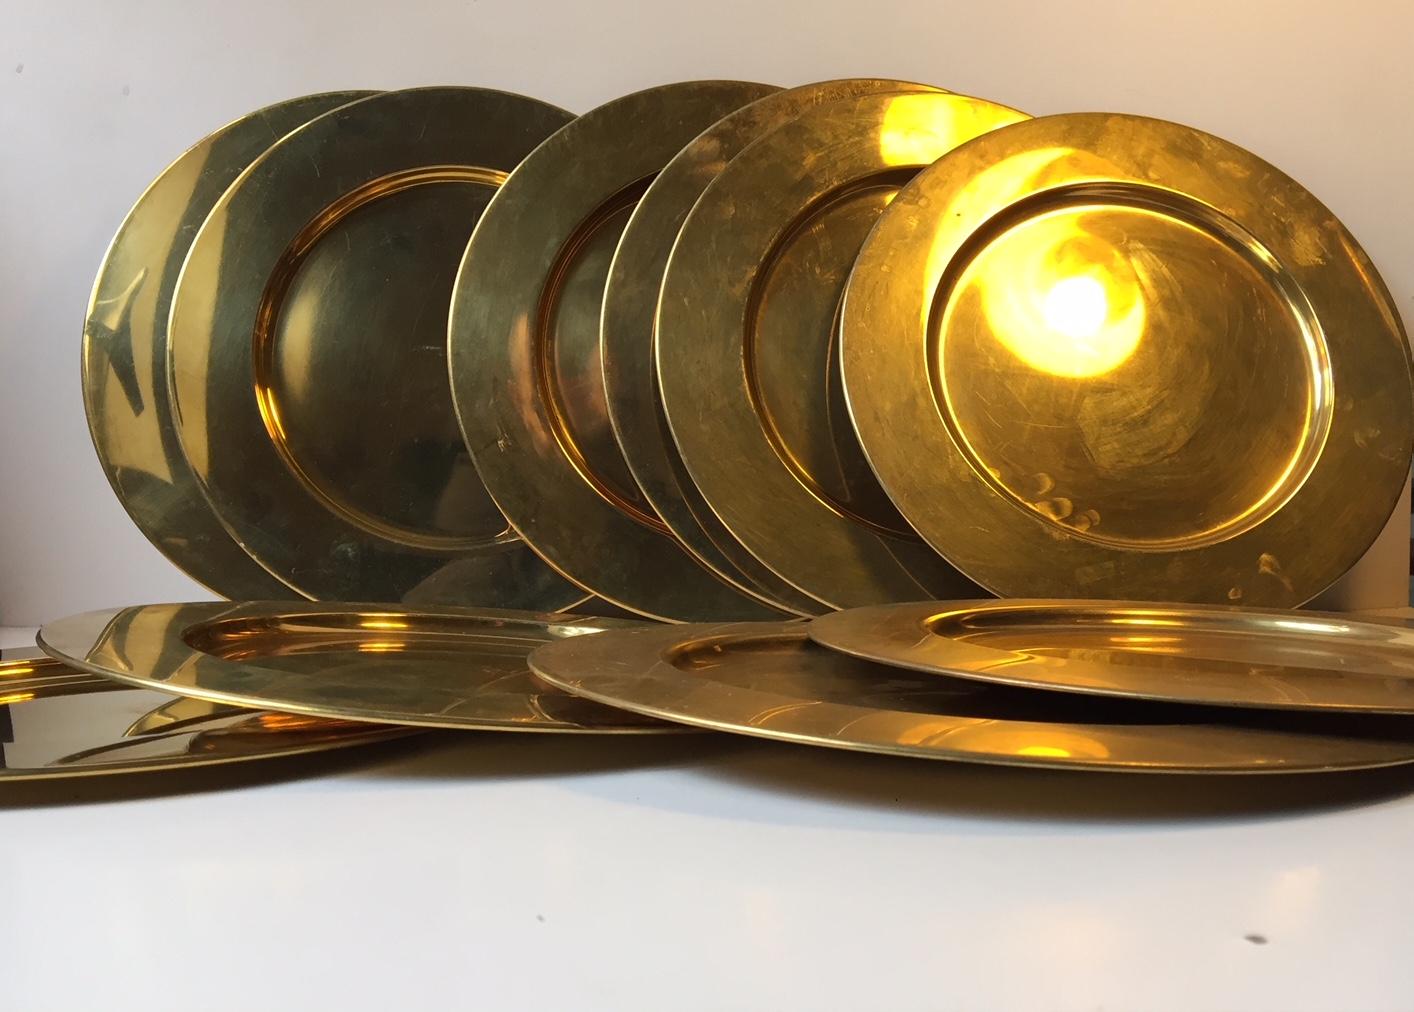 A set of 10 brass plates or cover plates. They were manufactured and designed in Denmark by Boye's during the 1970s. These plates are very similar to plates made by Stelton 5-10 years earlier. Some plates are thought to be unused.